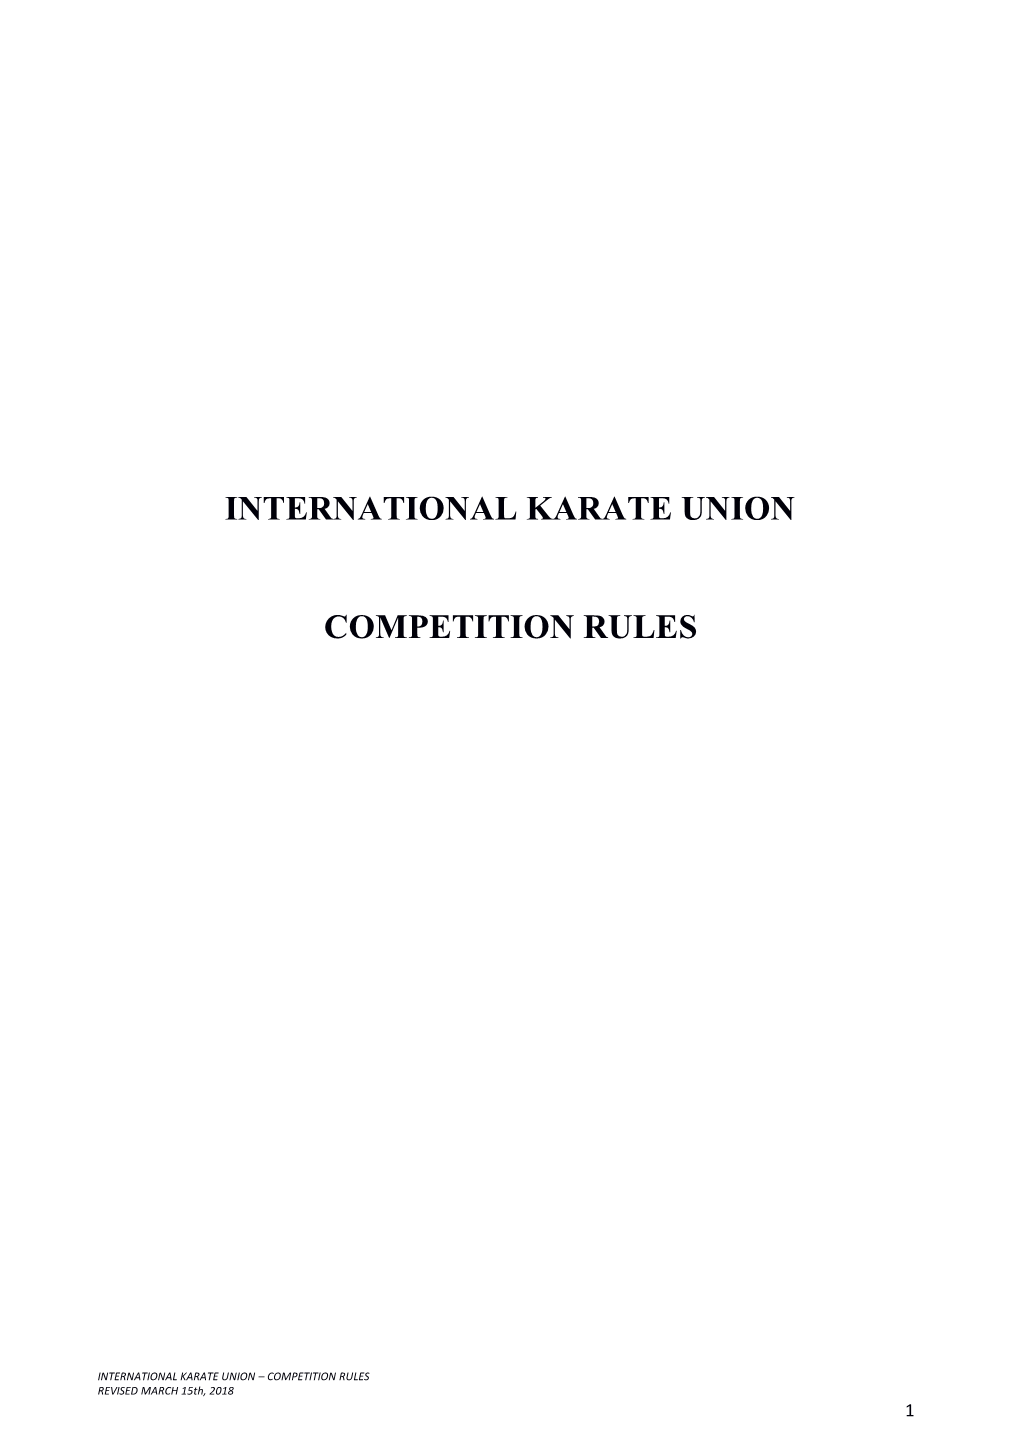 International Karate Union Competition Rules